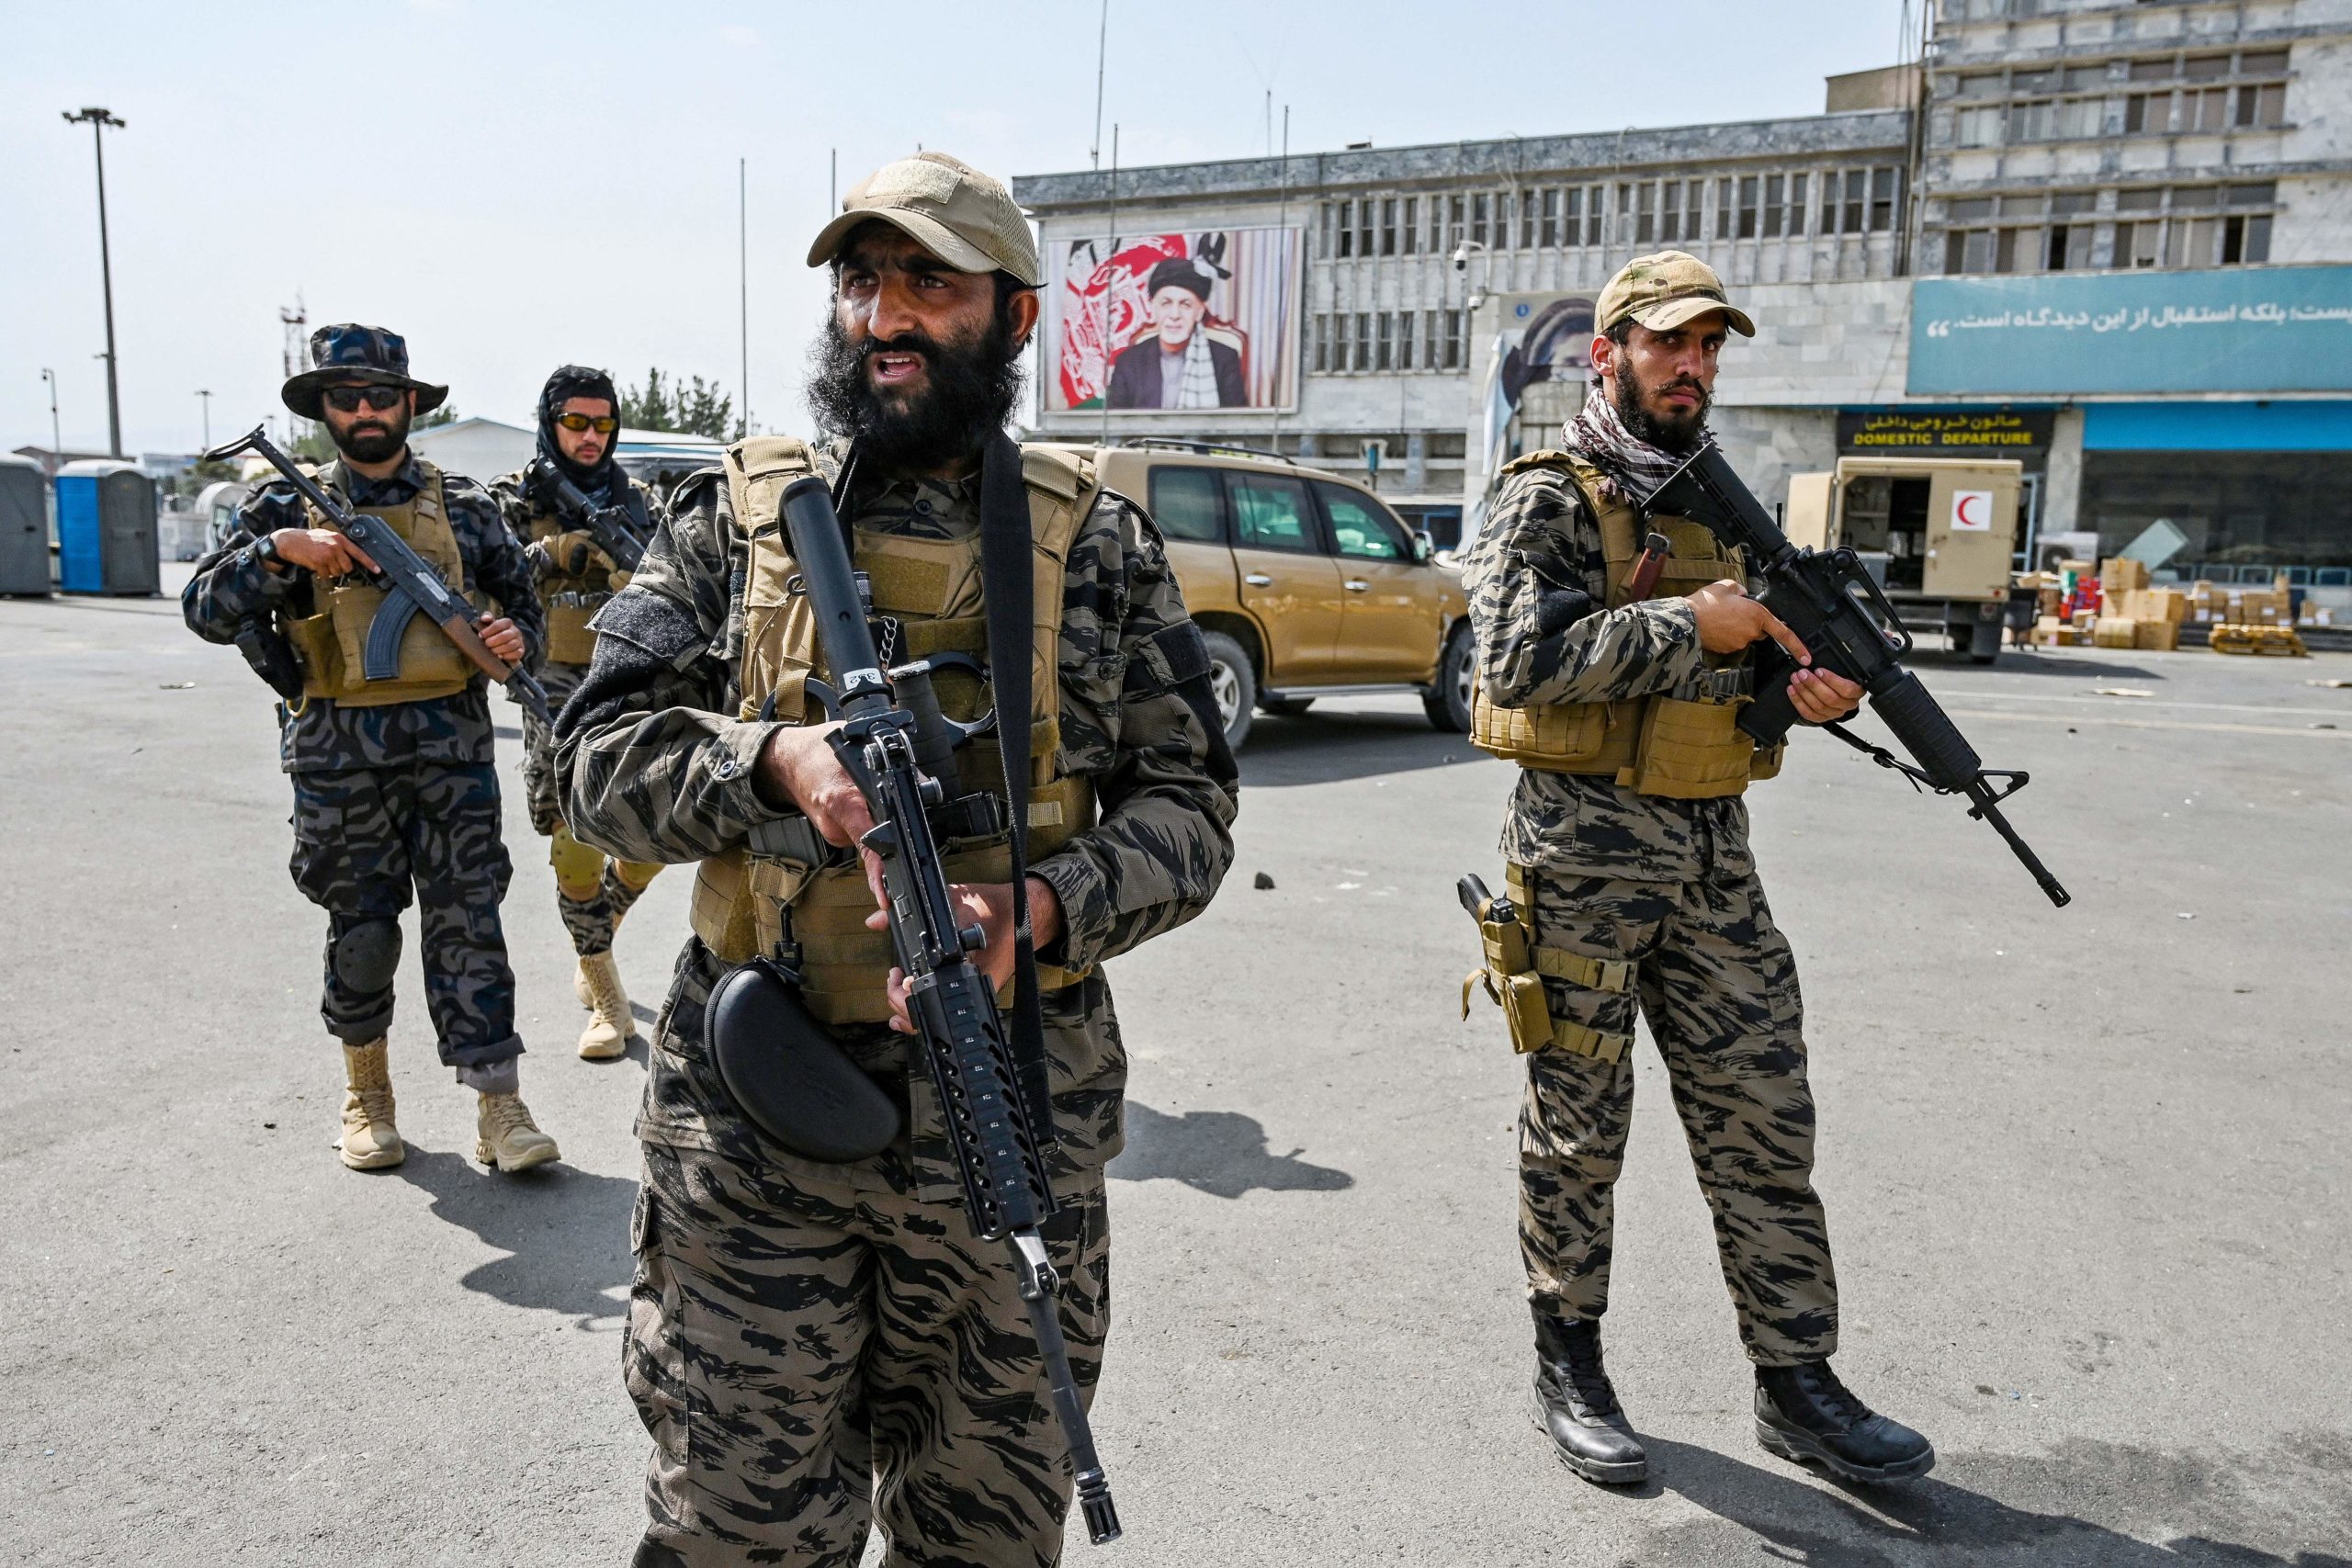 Members of the Taliban special forces military unit arrive at the Kabul airport on Aug. 31 where the U.S. conducted a massive evacuation operation. (Wakil Kohsar/AFP via Getty Images)